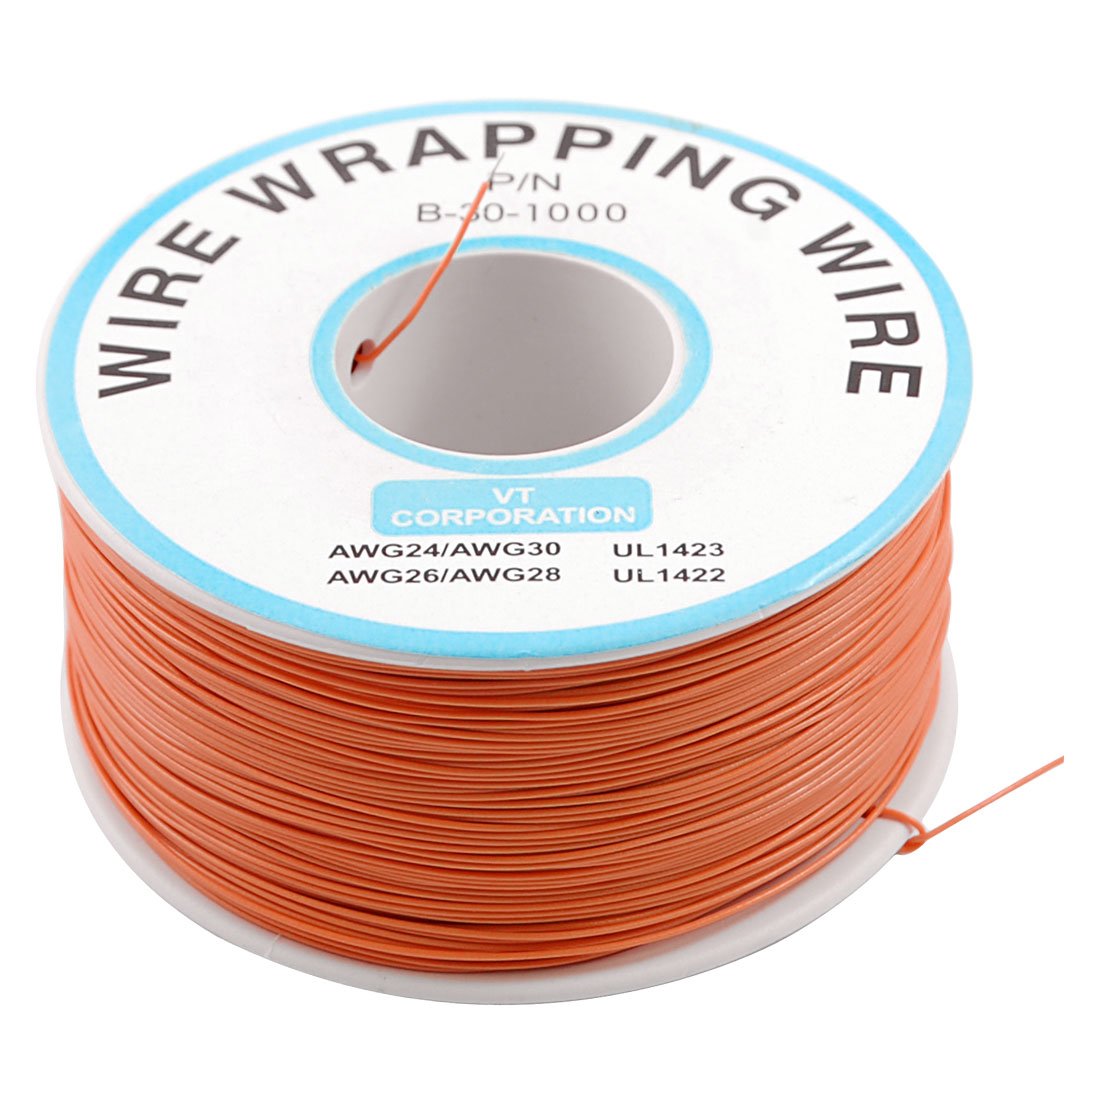 IMC Hot PCB Solder Orange Flexible 0.5mm Outside Dia 30AWG Wire Wrapping Wrap 1000Ft